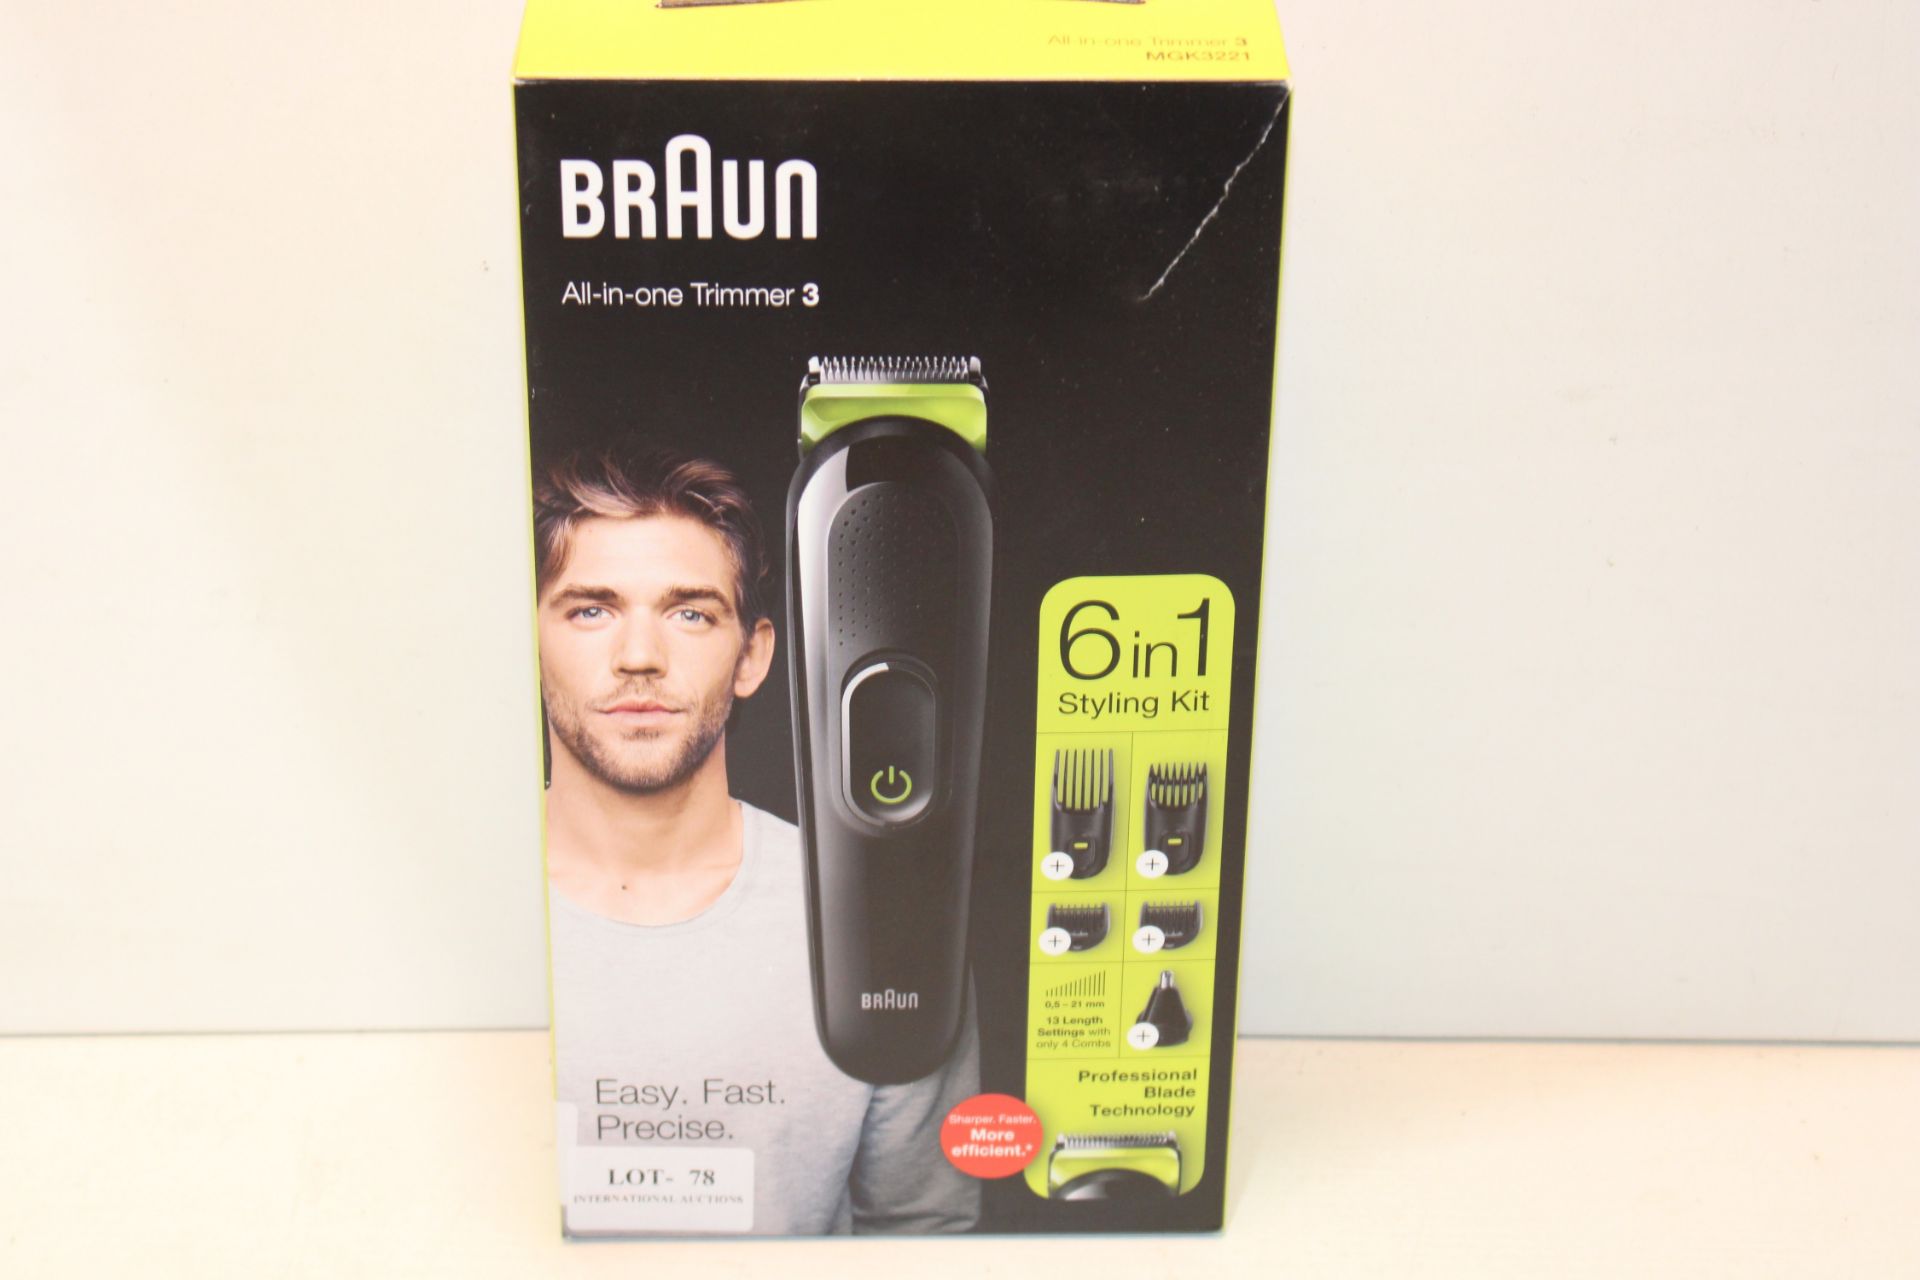 BOXED BRAUN ALL-IN-ONE TRIMMER 3 RRP £34.99Condition ReportAppraisal Available on Request- All Items